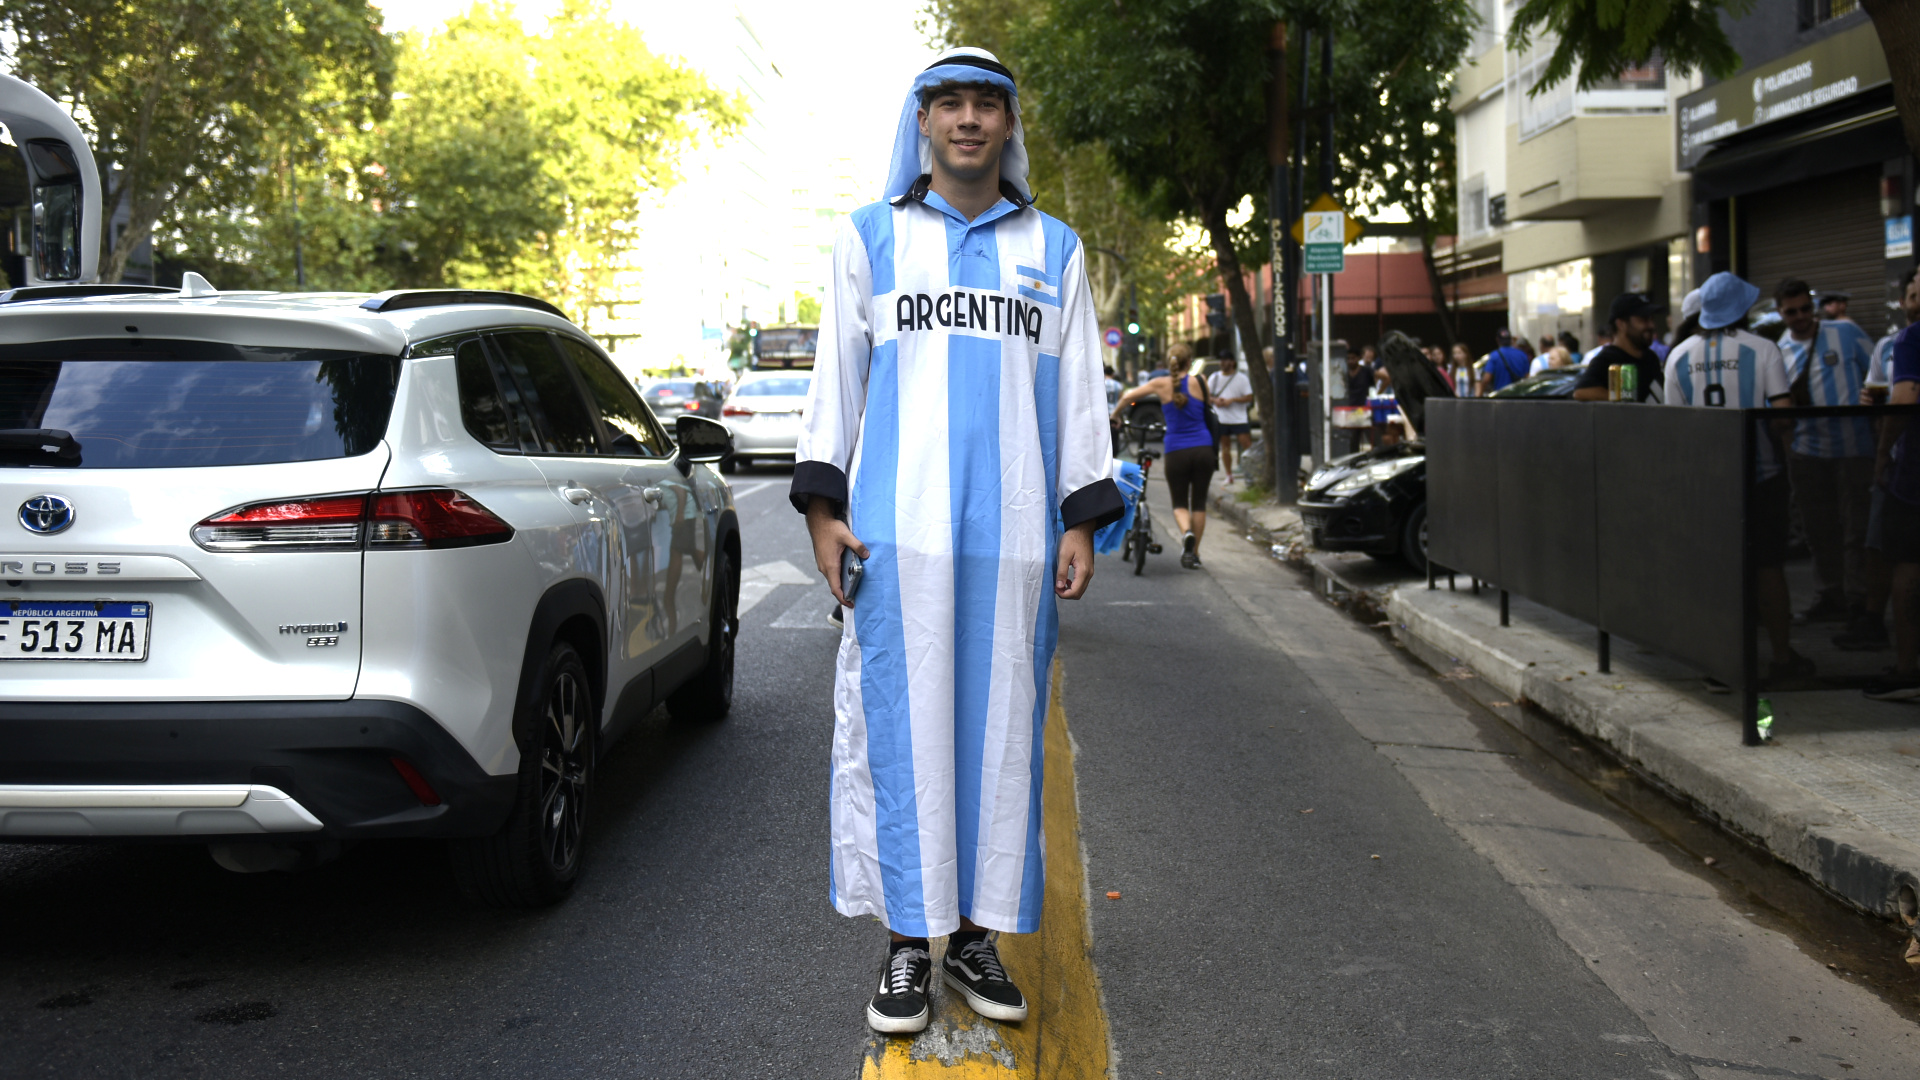 A fan dressed up in an Arab style alluding to Qatar, where Lionel Scaloni's team got the third star